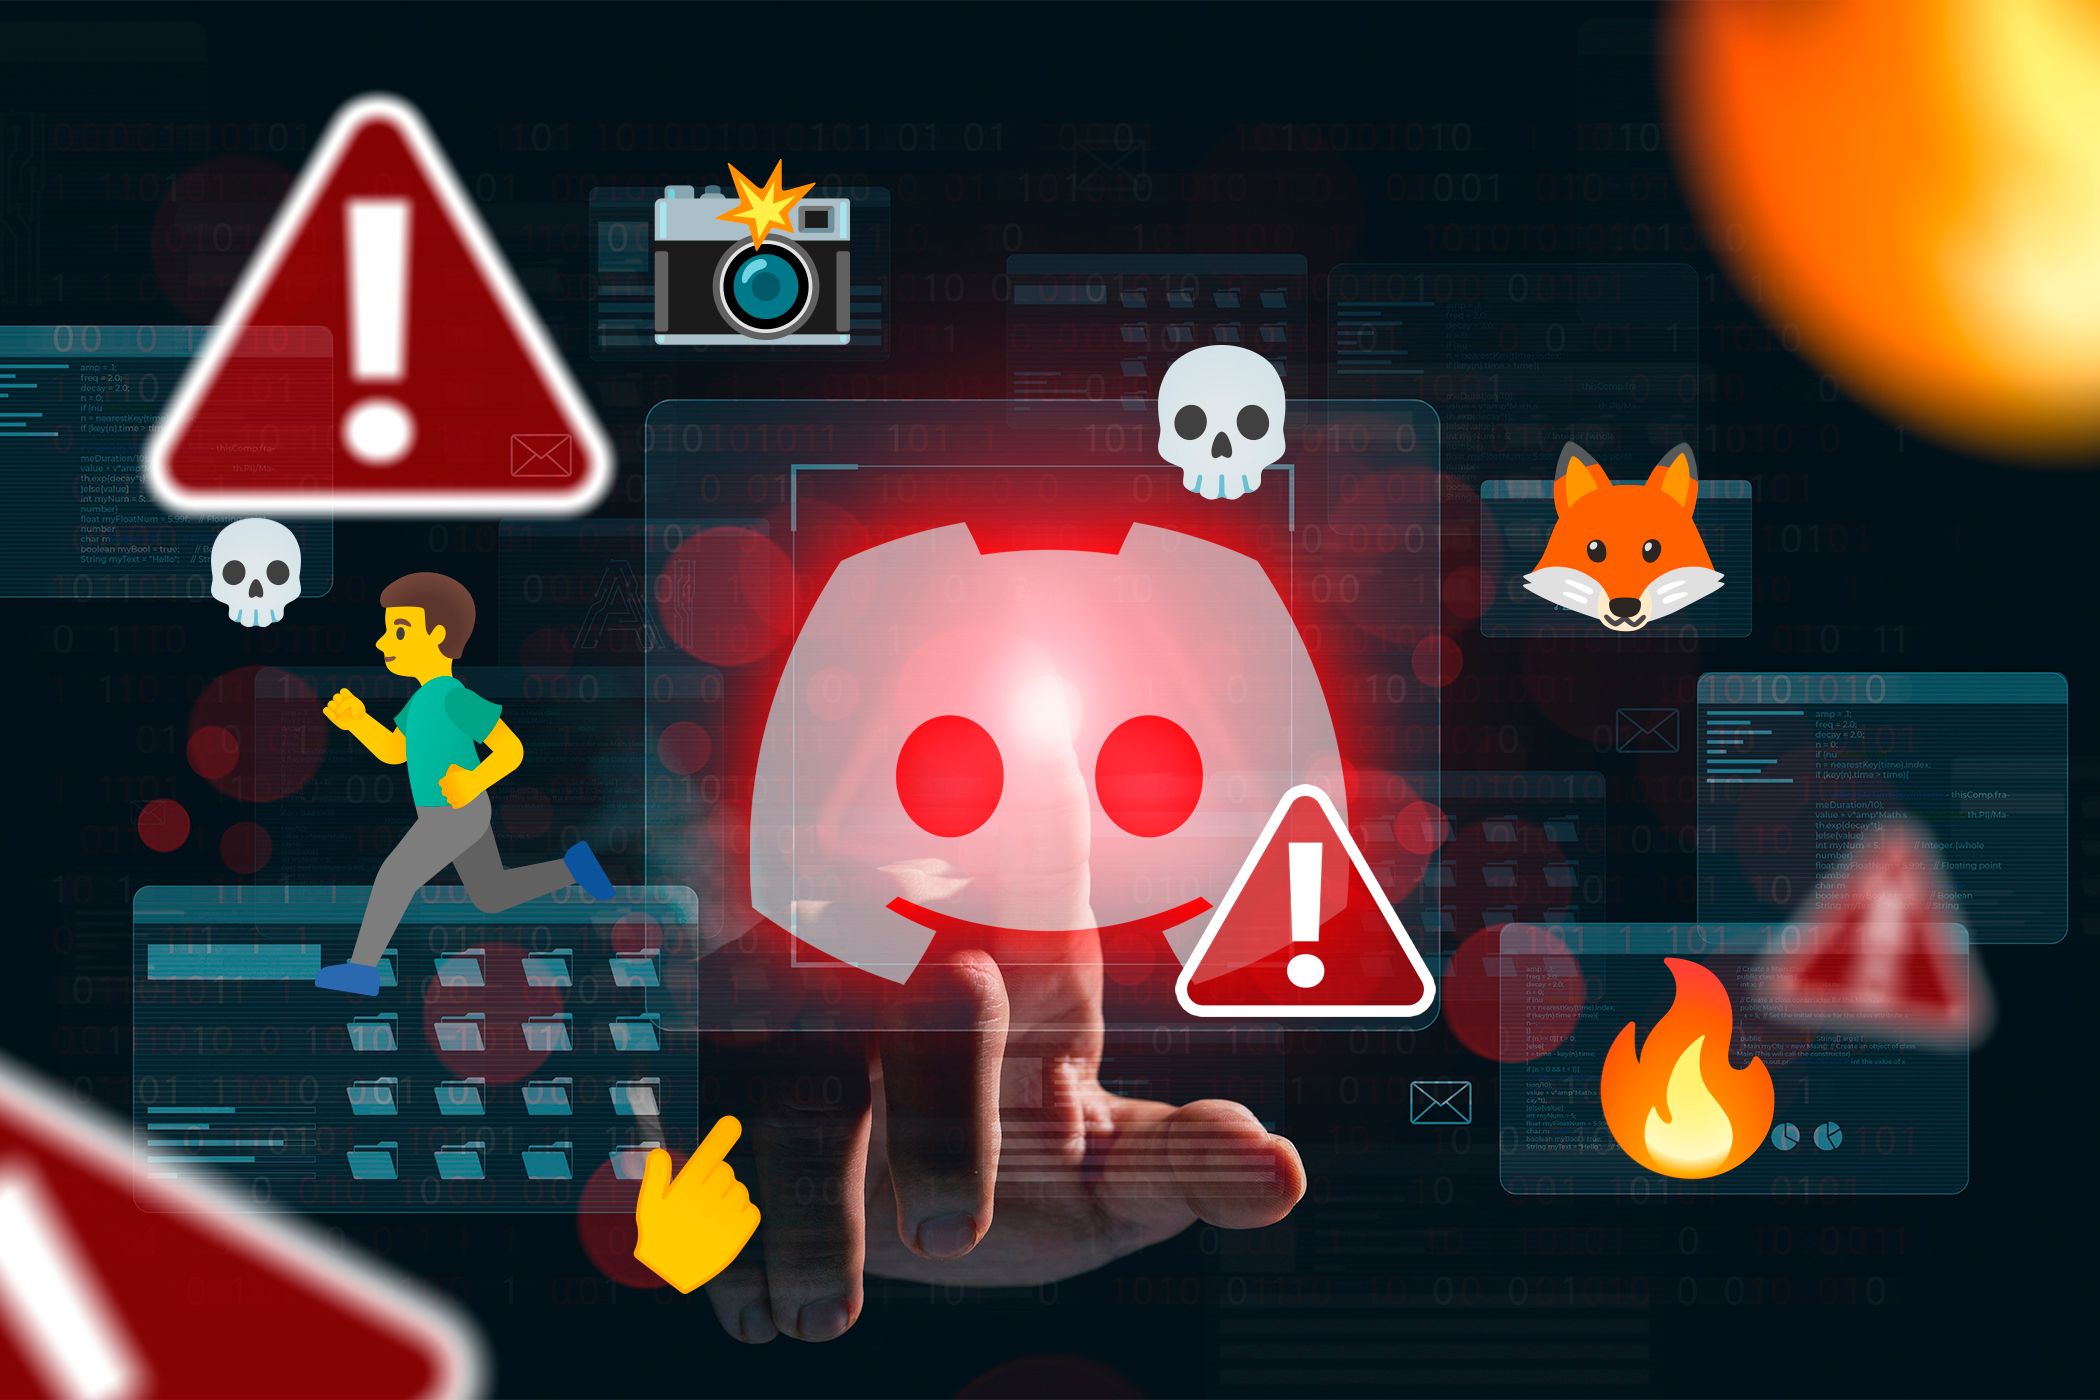 Discord logo with several emojis and alert icons